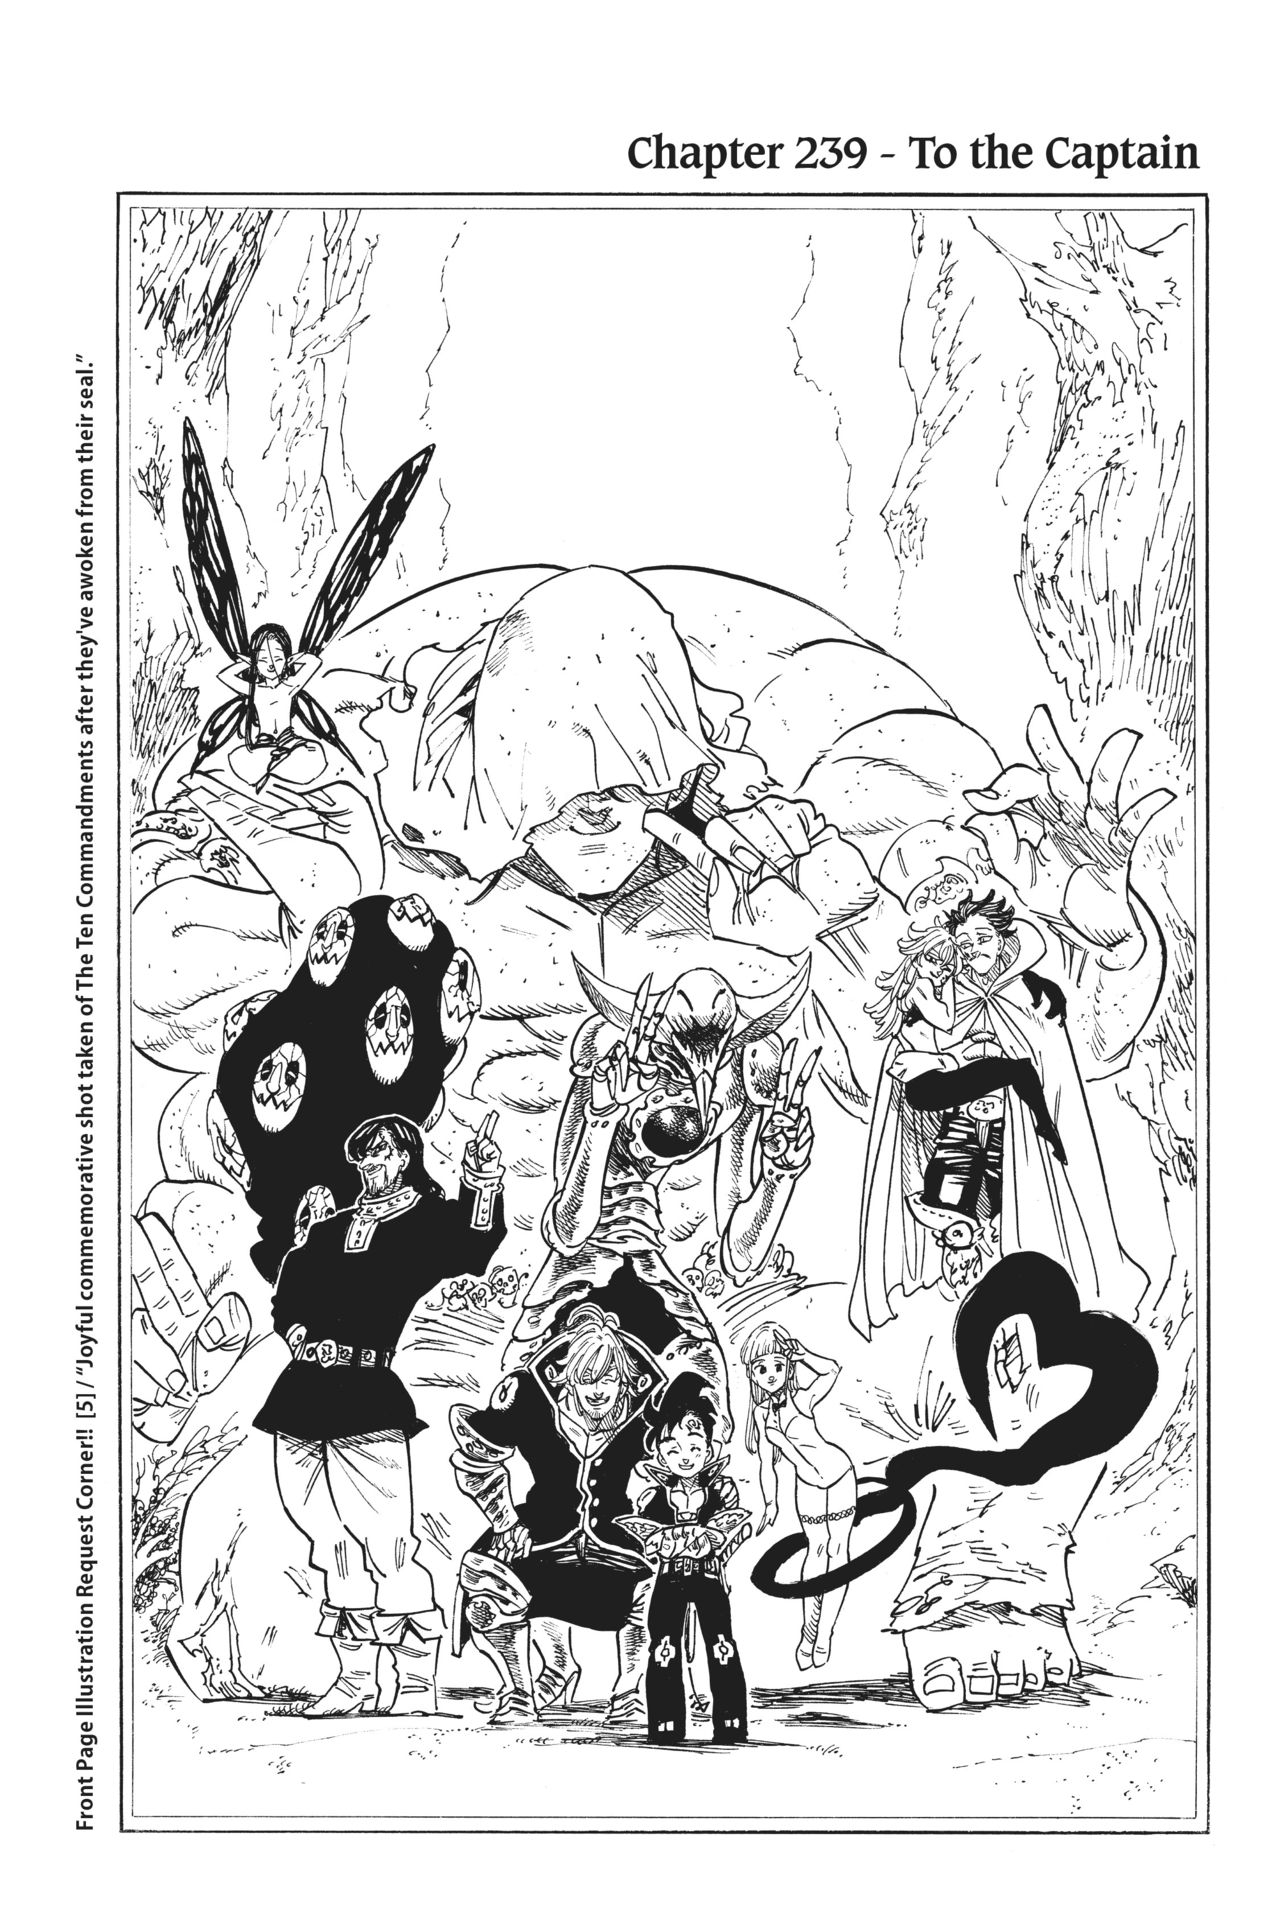 The Seven Deadly Sins (Covers & Chapter Title Cards) 163